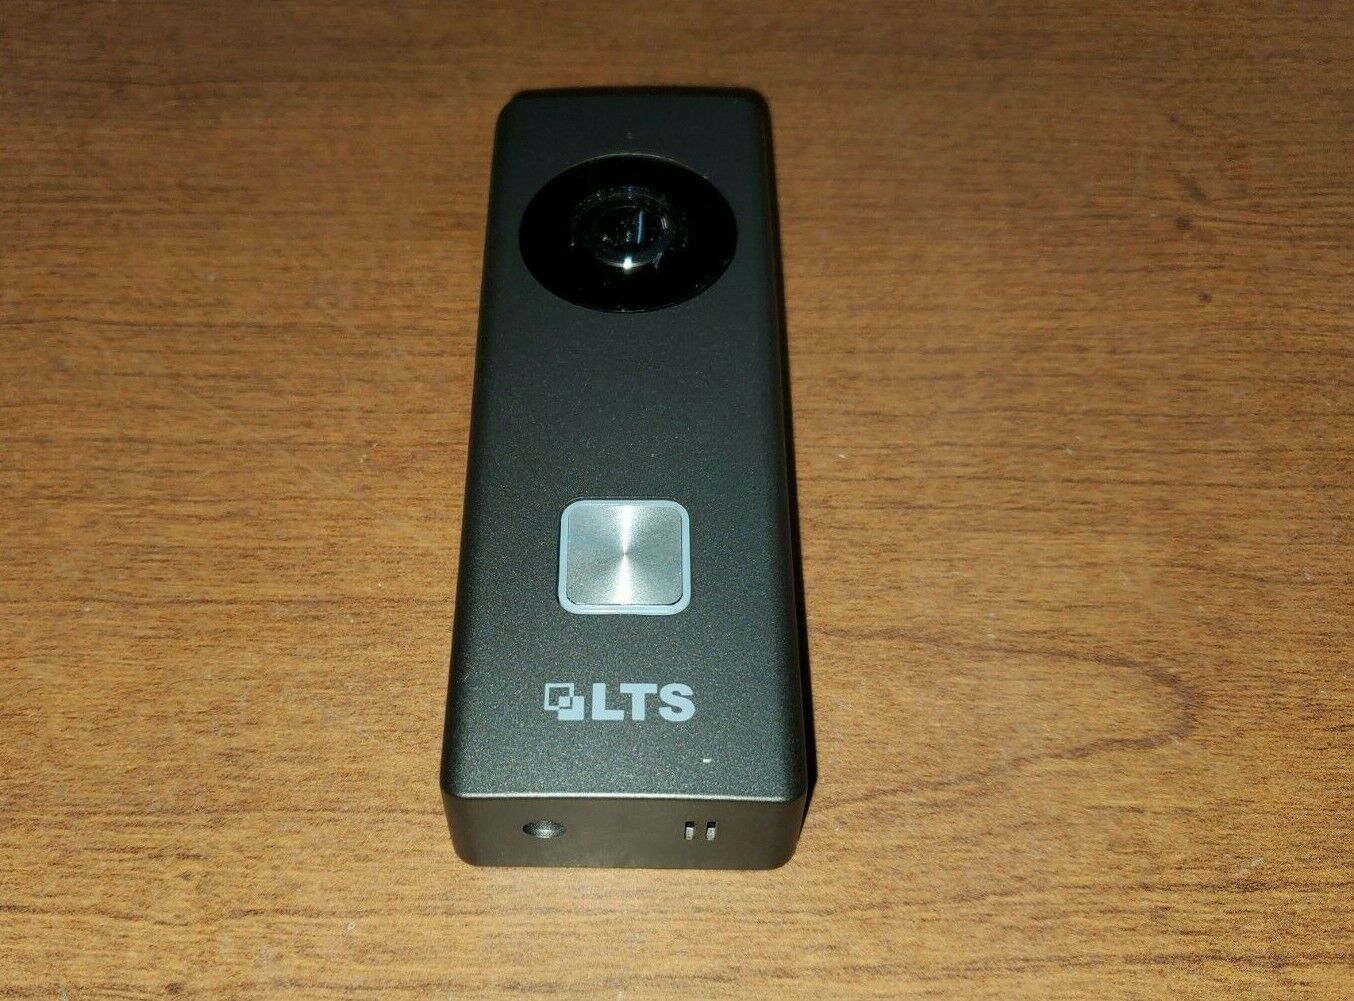 How To Text Photos From LTS Video Doorbell